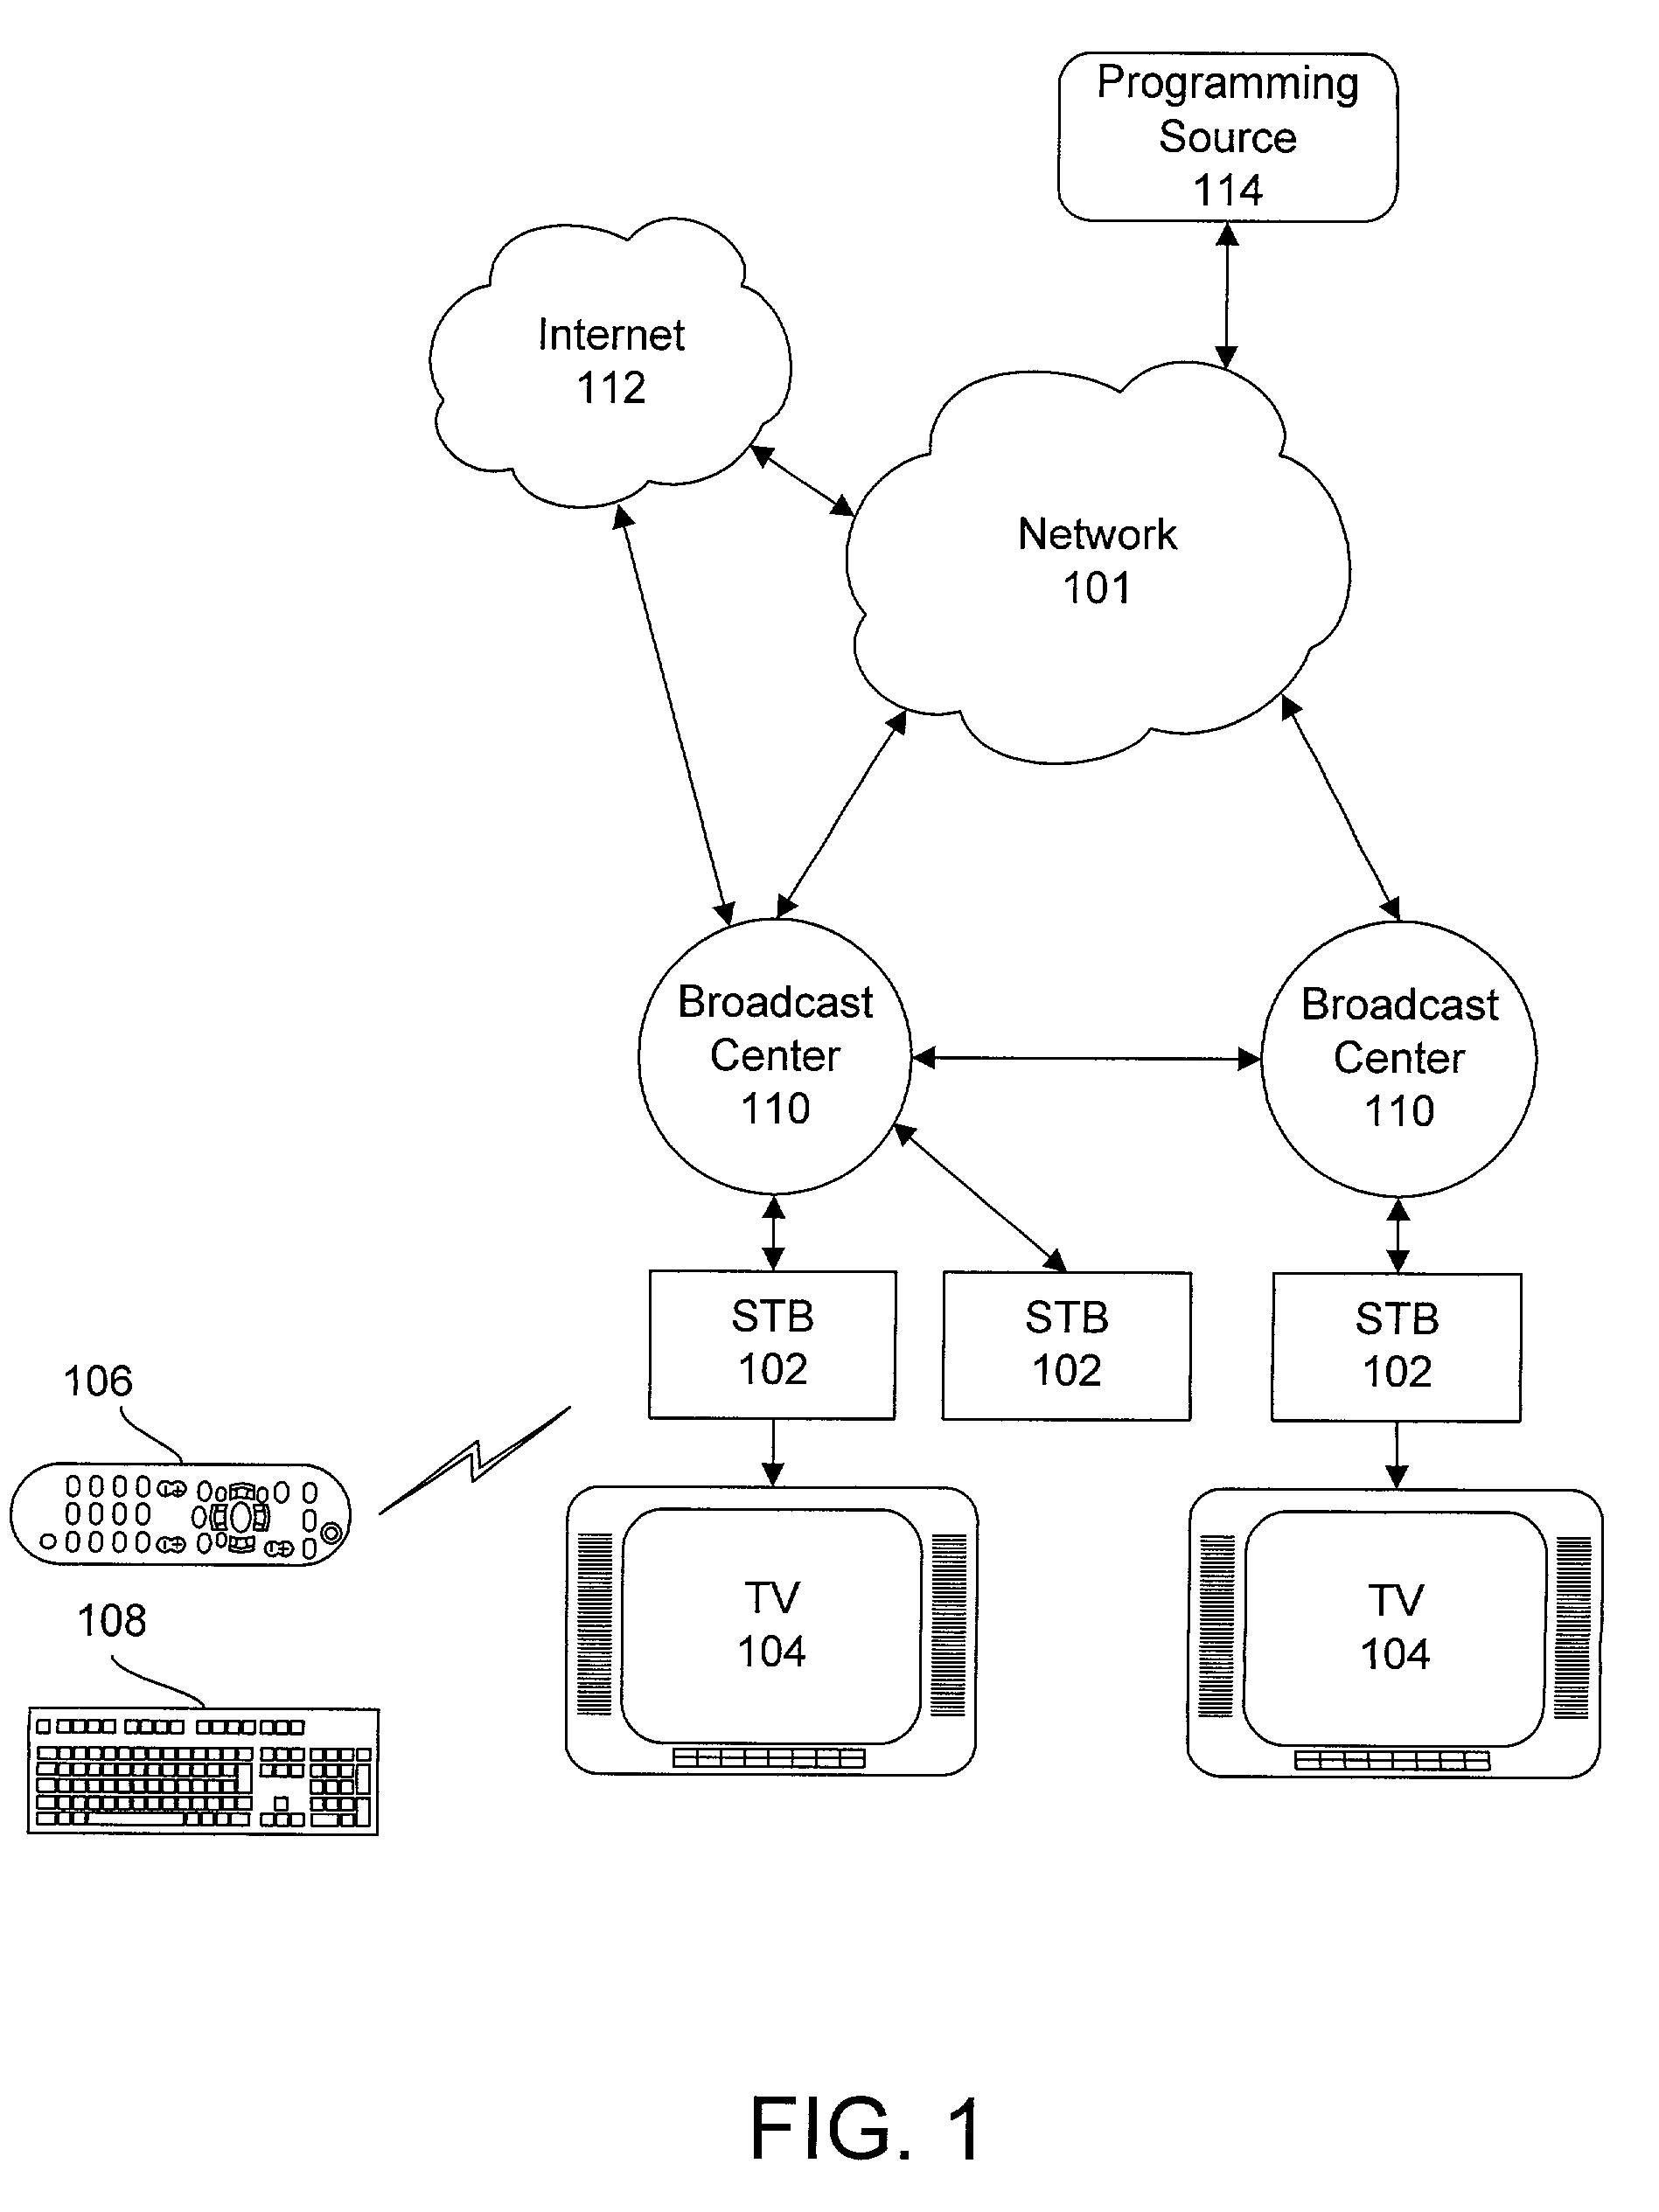 Method and system for distributing personalized editions of media programs using bookmarks